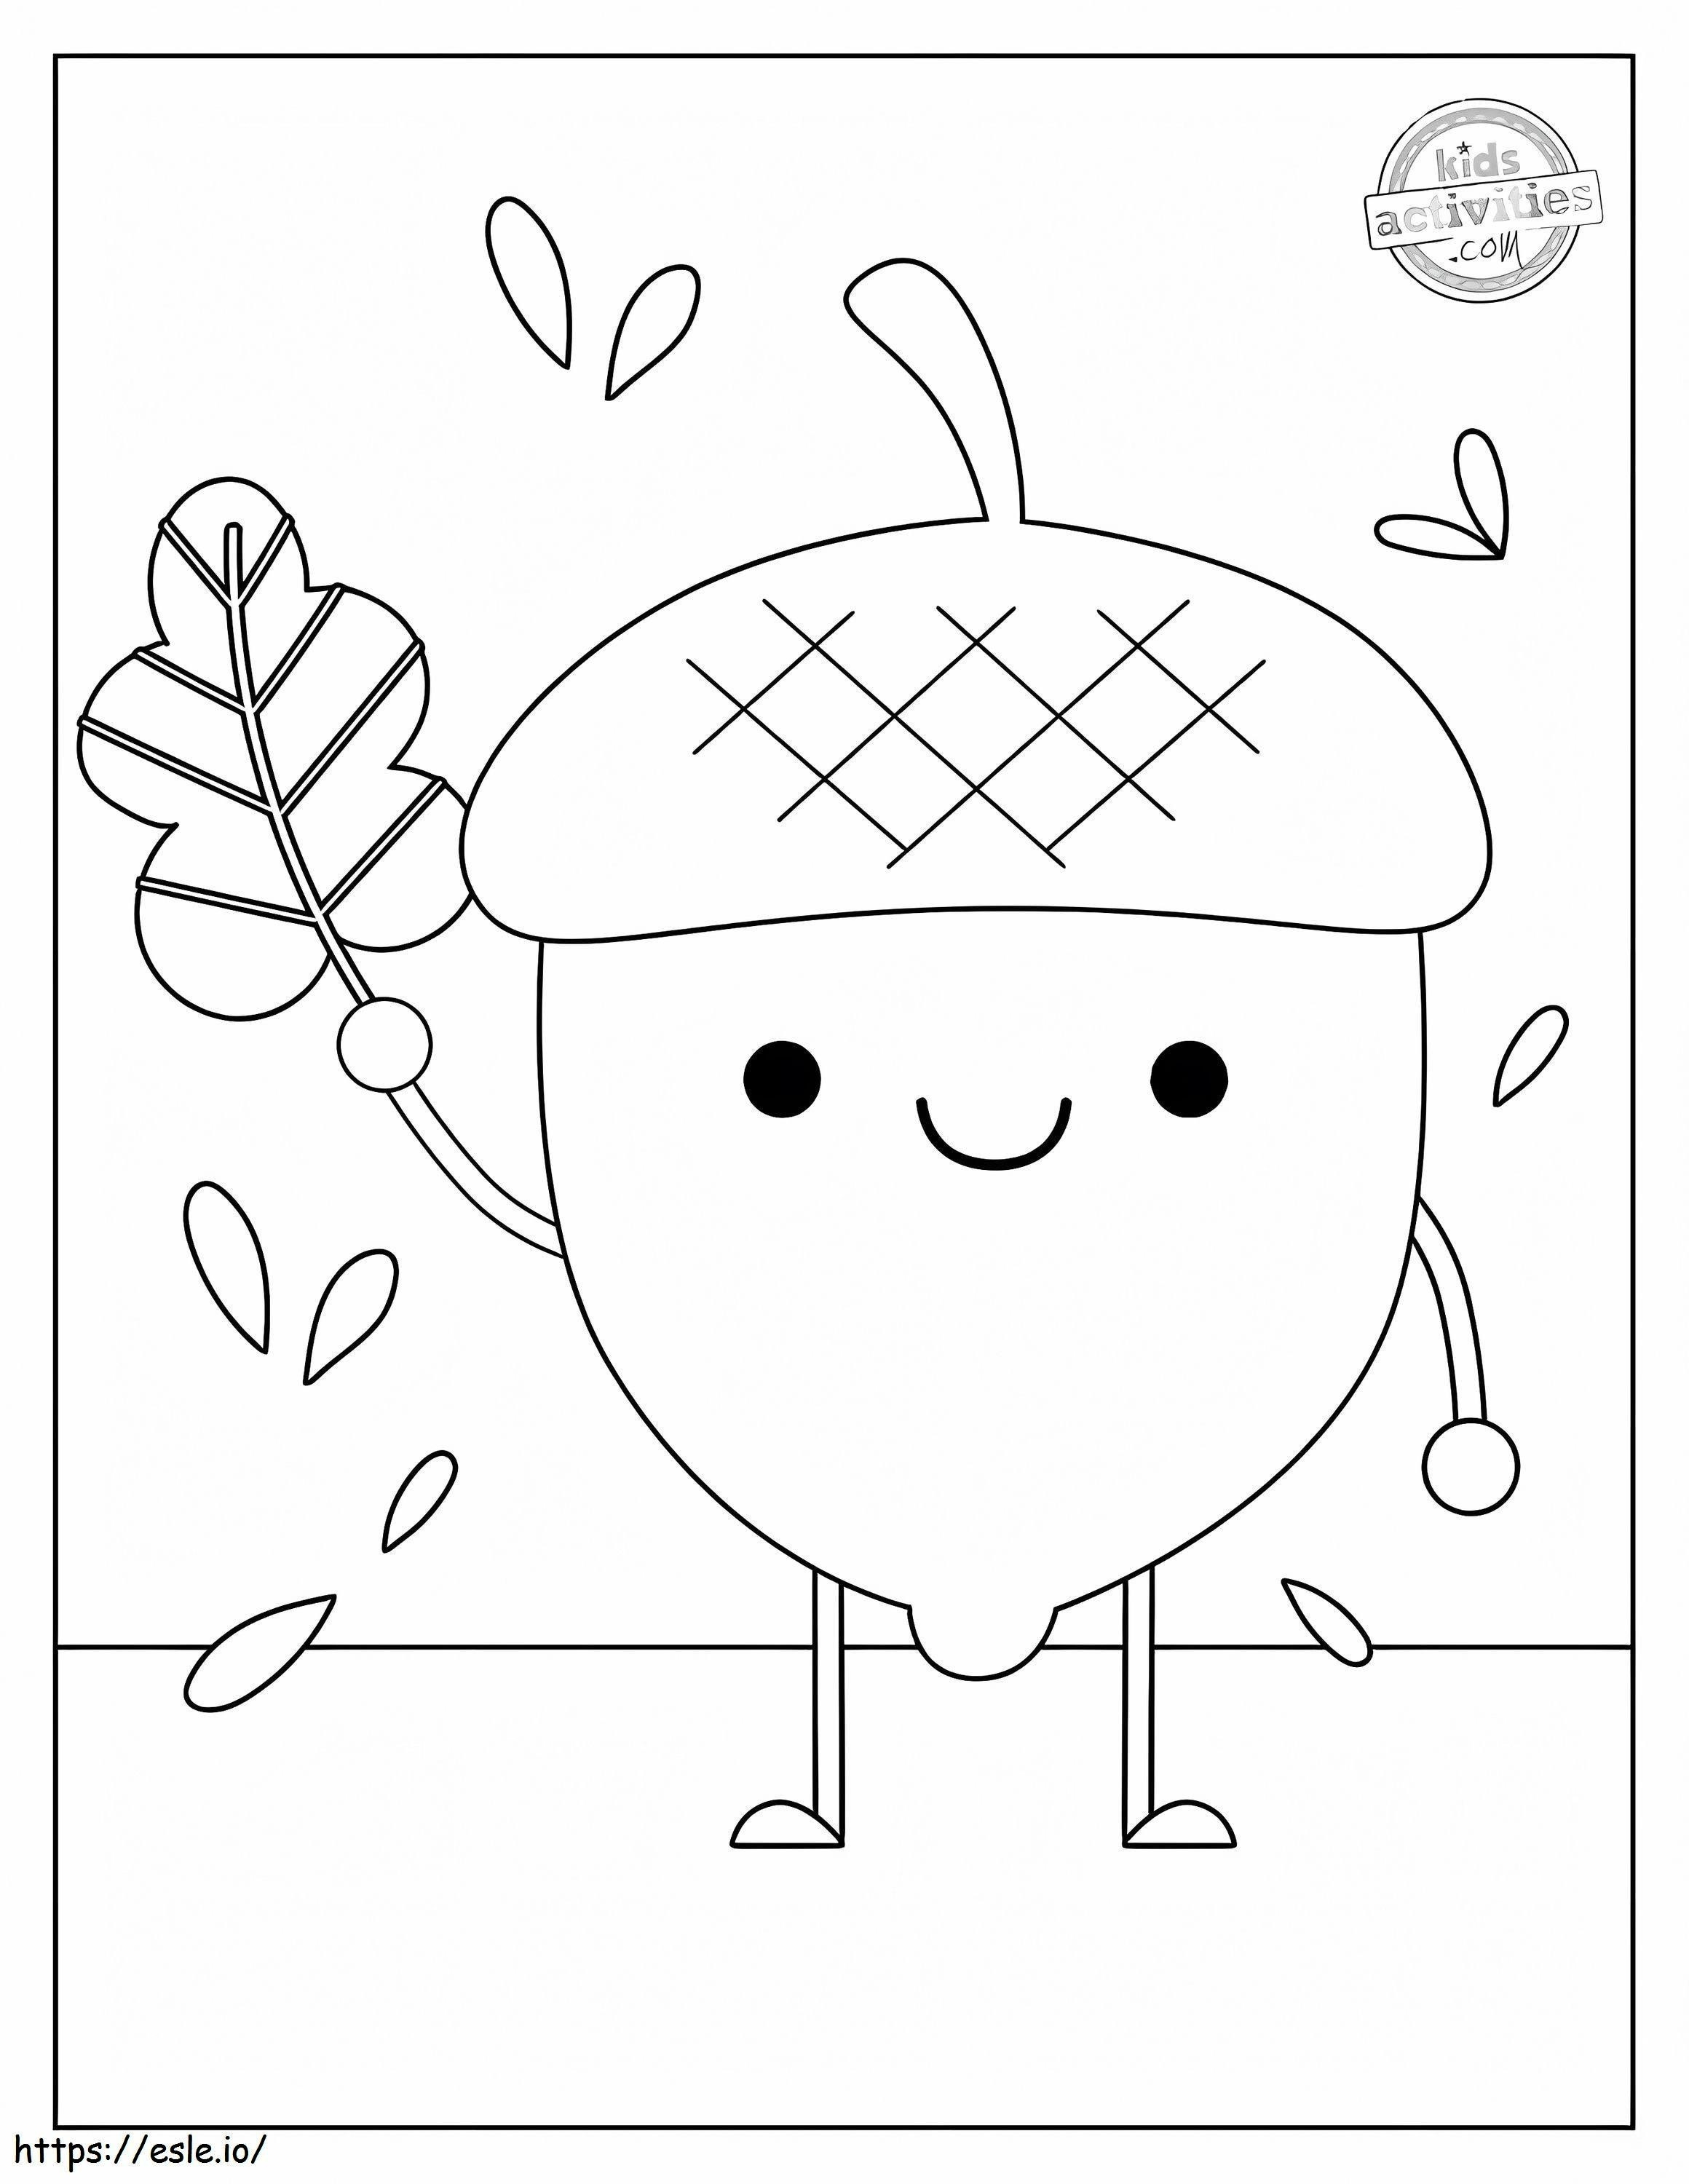 Acorn Smiling coloring page